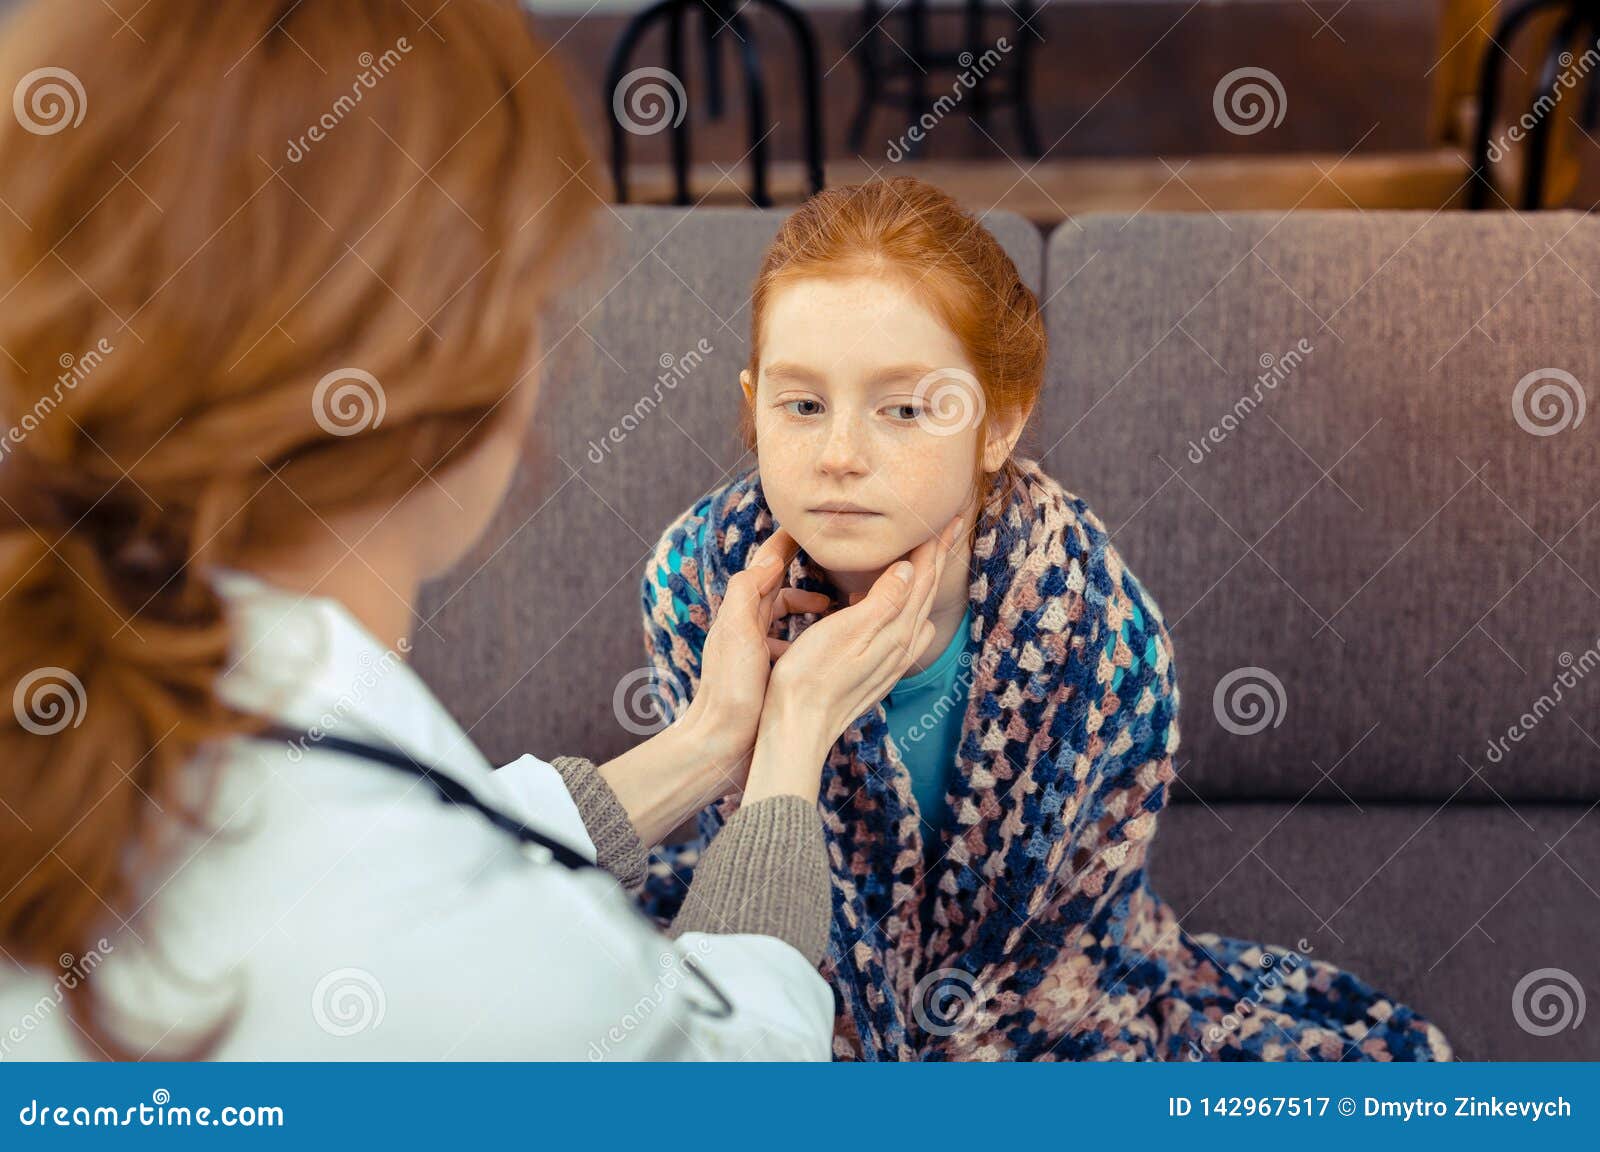 Nice Red Haired Girl Having Her Throat Checked Stock Image I